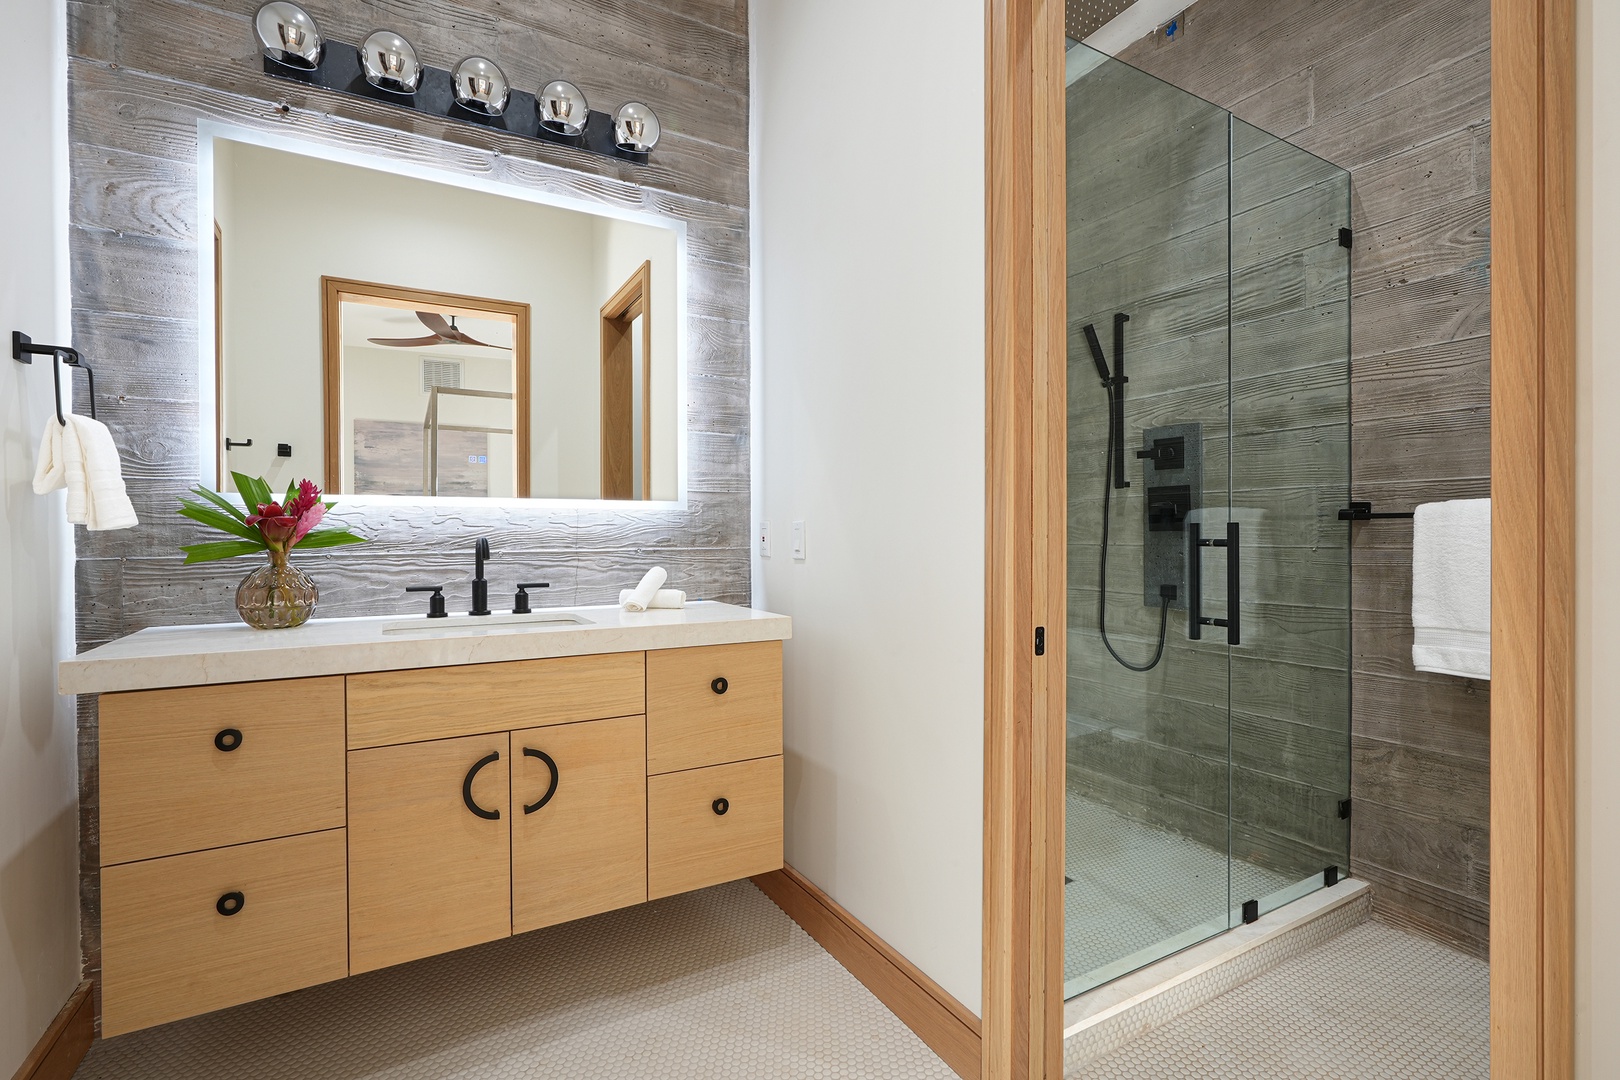 Koloa Vacation Rentals, Hale Keaka at Kukui'ula - Indulge in the sleekness of this ensuite, boasting a spacious walk-in shower and a vanity.